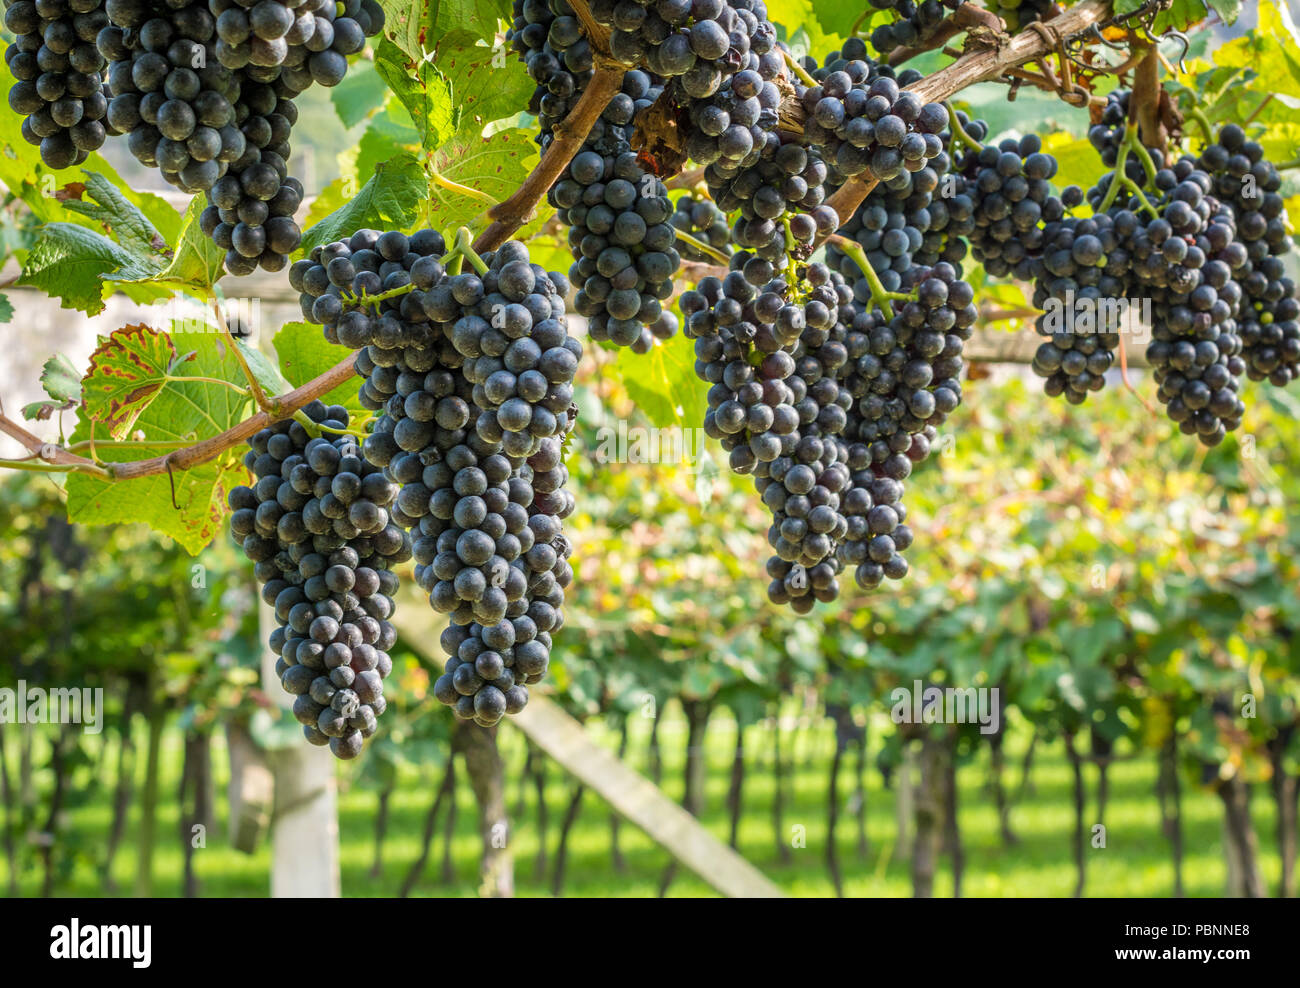 Teroldego grape variety. Teroldego is a deeply colored red wine grape grown mostly in the Trentino wine region of northern Italy Stock Photo